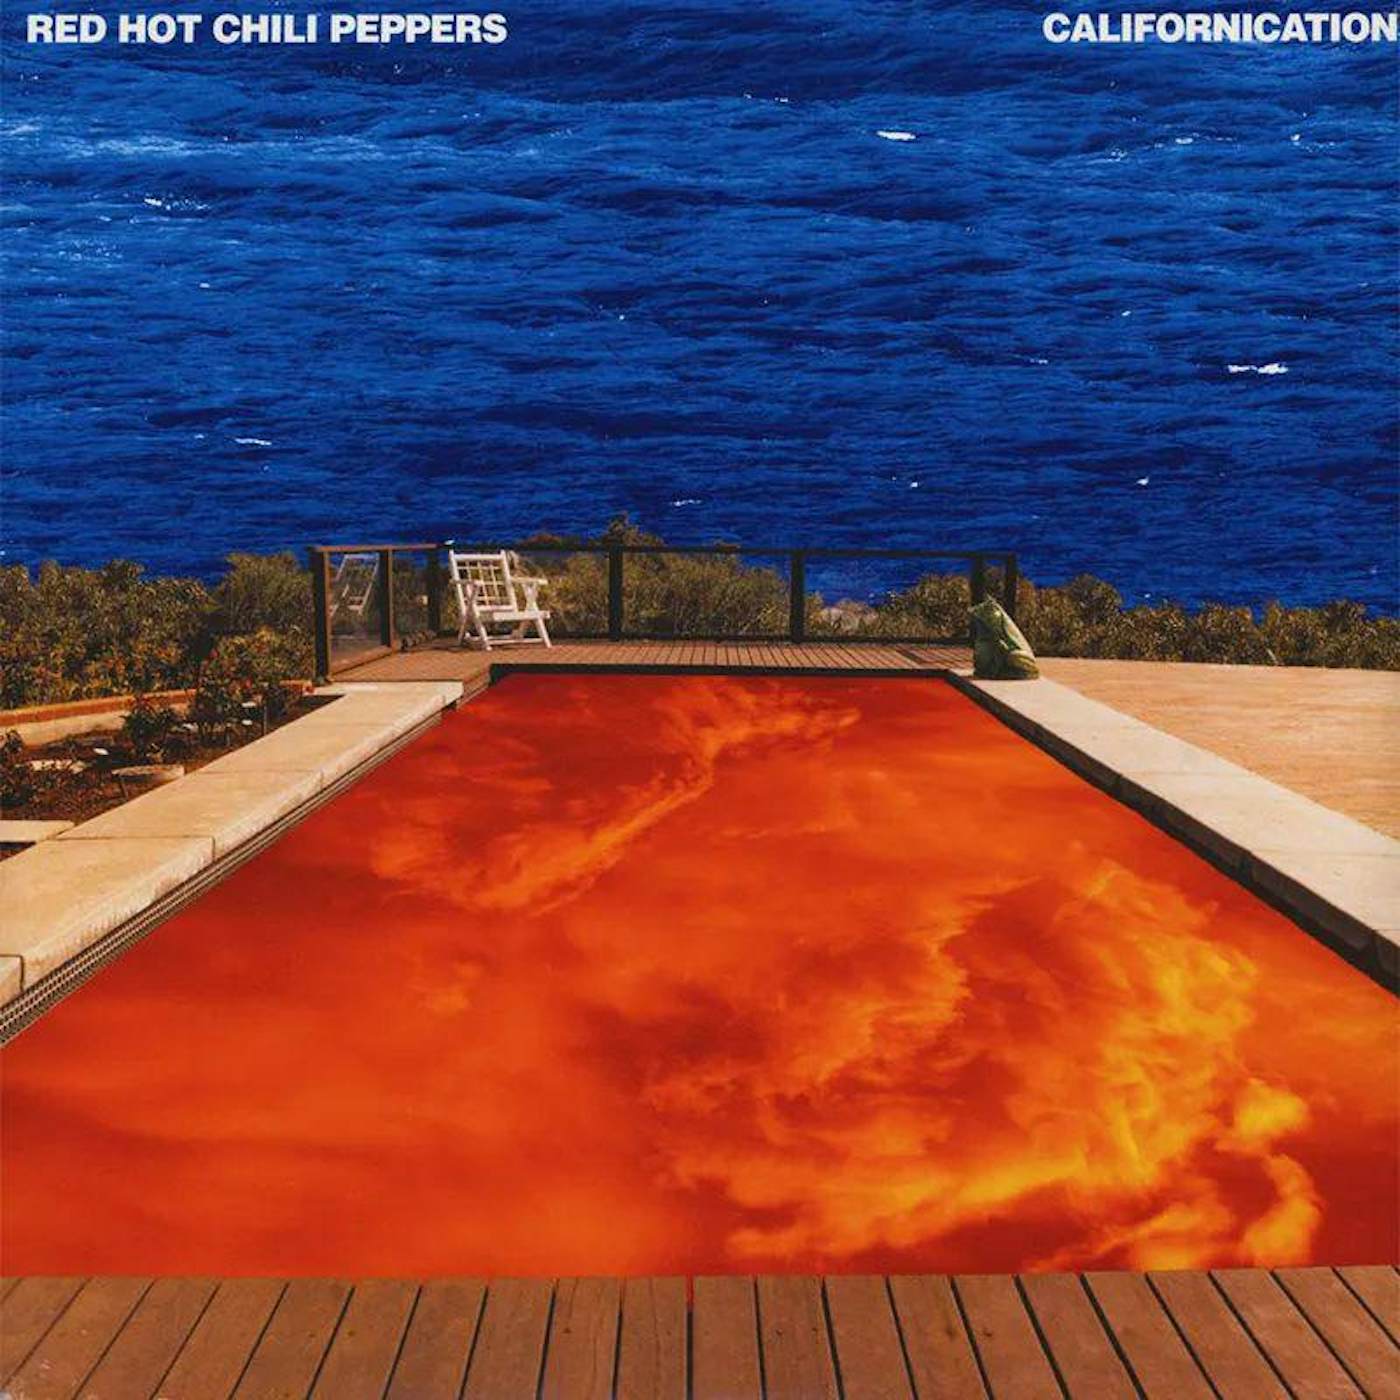 Red Hot Chili Peppers Californication (2LP/180 G) Vinyl Record